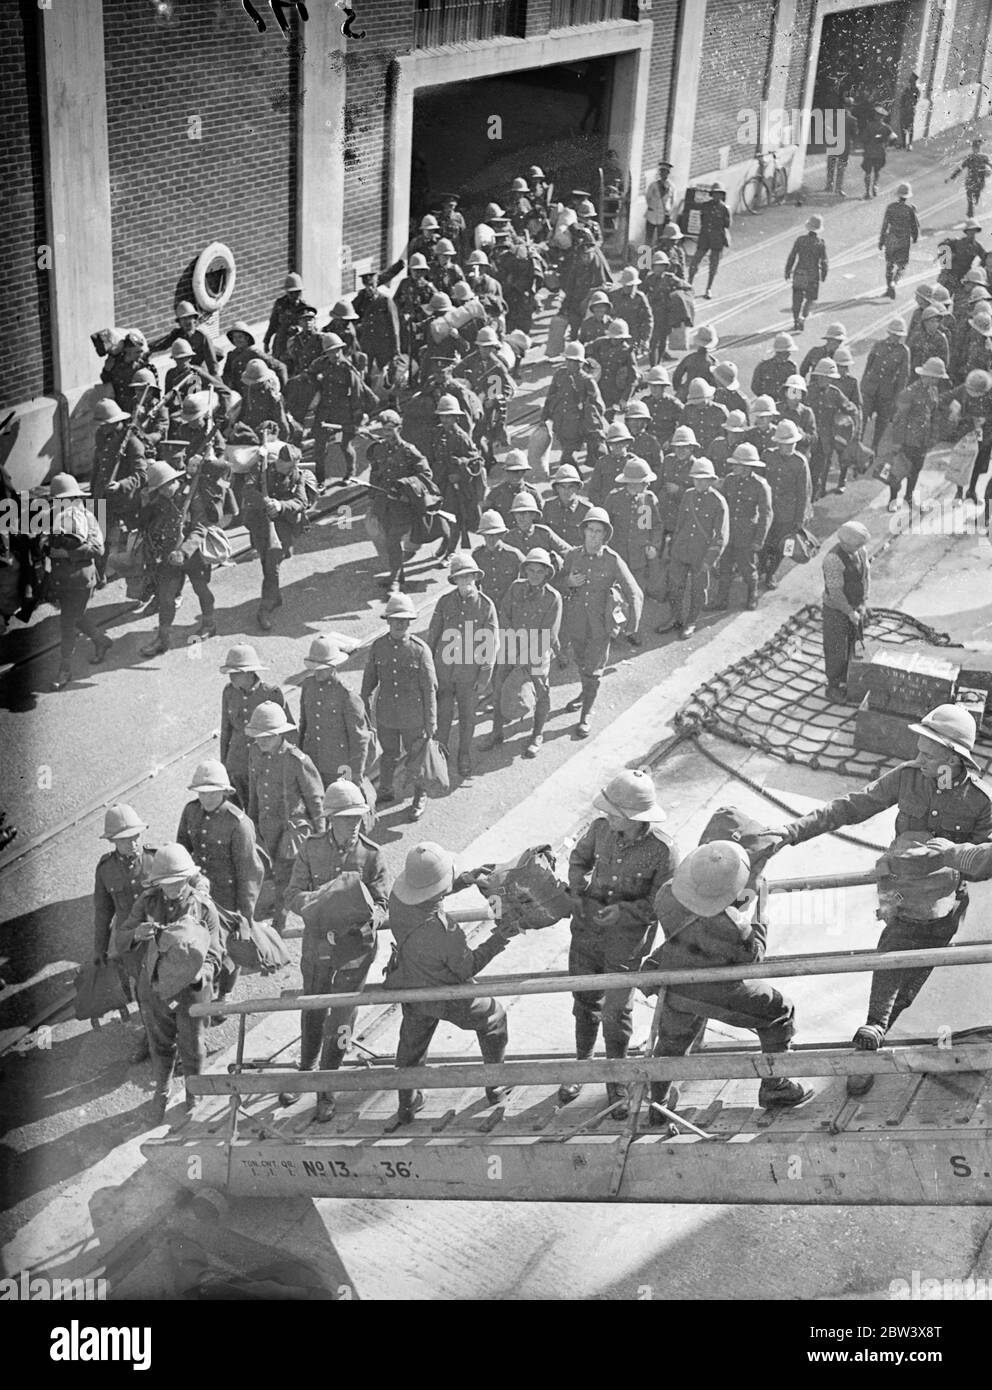 Two ships leave with troops for Palestine . Further detachment troops member of the Royal Ordinance Corps and the East Yorkshire's Regiment , left Southampton aboard the troopship Nevass and the liner Laurentic for Palestine . Photo shows , men of the East Yorkshire Regiment handing up their kit on Nevass as the Royal Army ordnance court attachment marches past to the Laurentic . 14 September 1936 Stock Photo